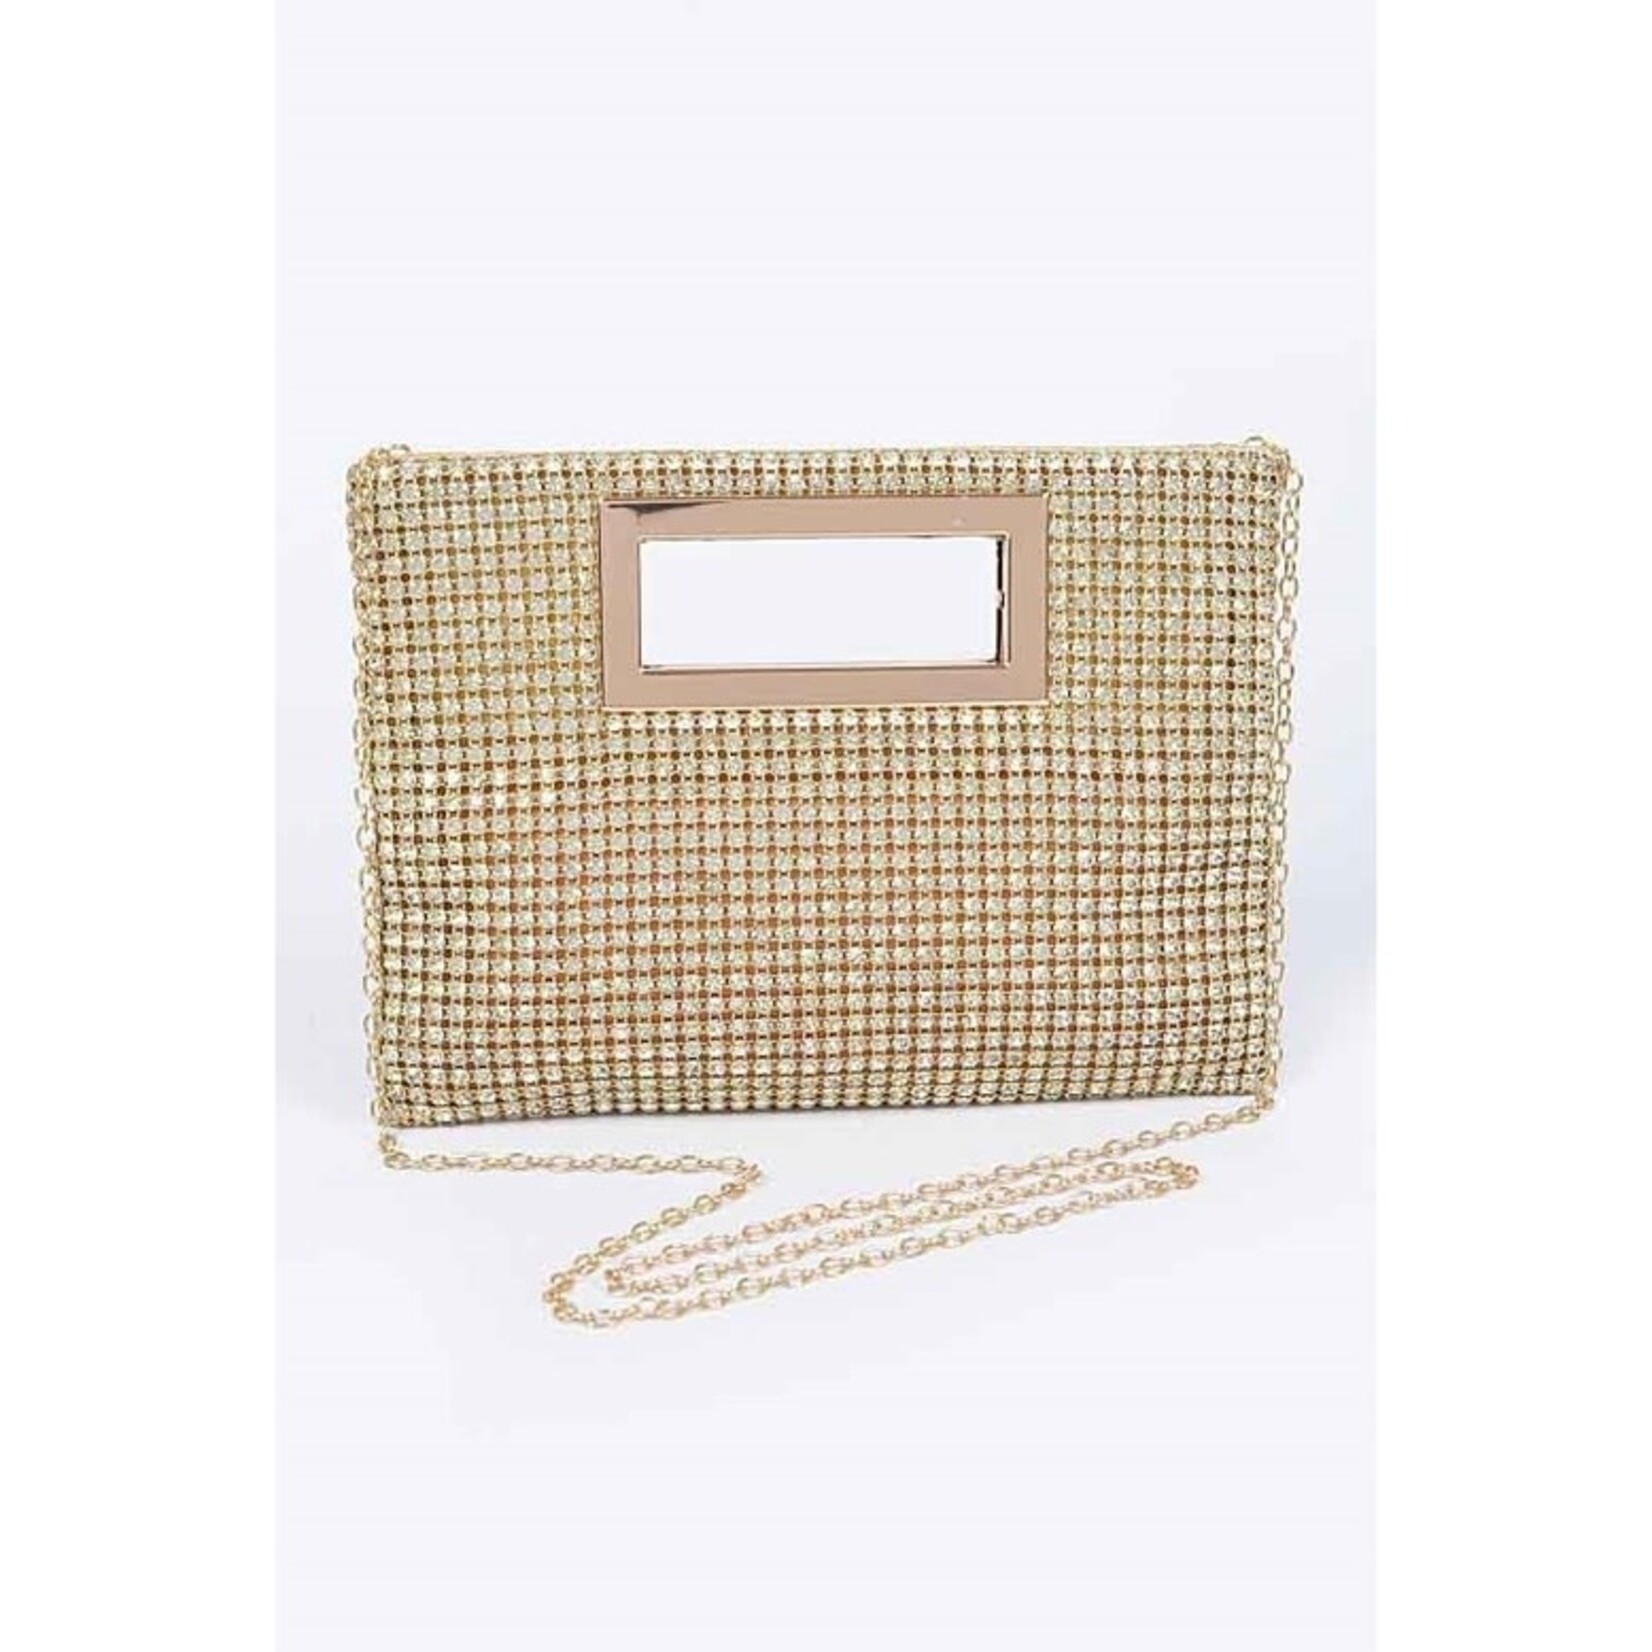 Rhinestone Clutch with Top Handle in Gold